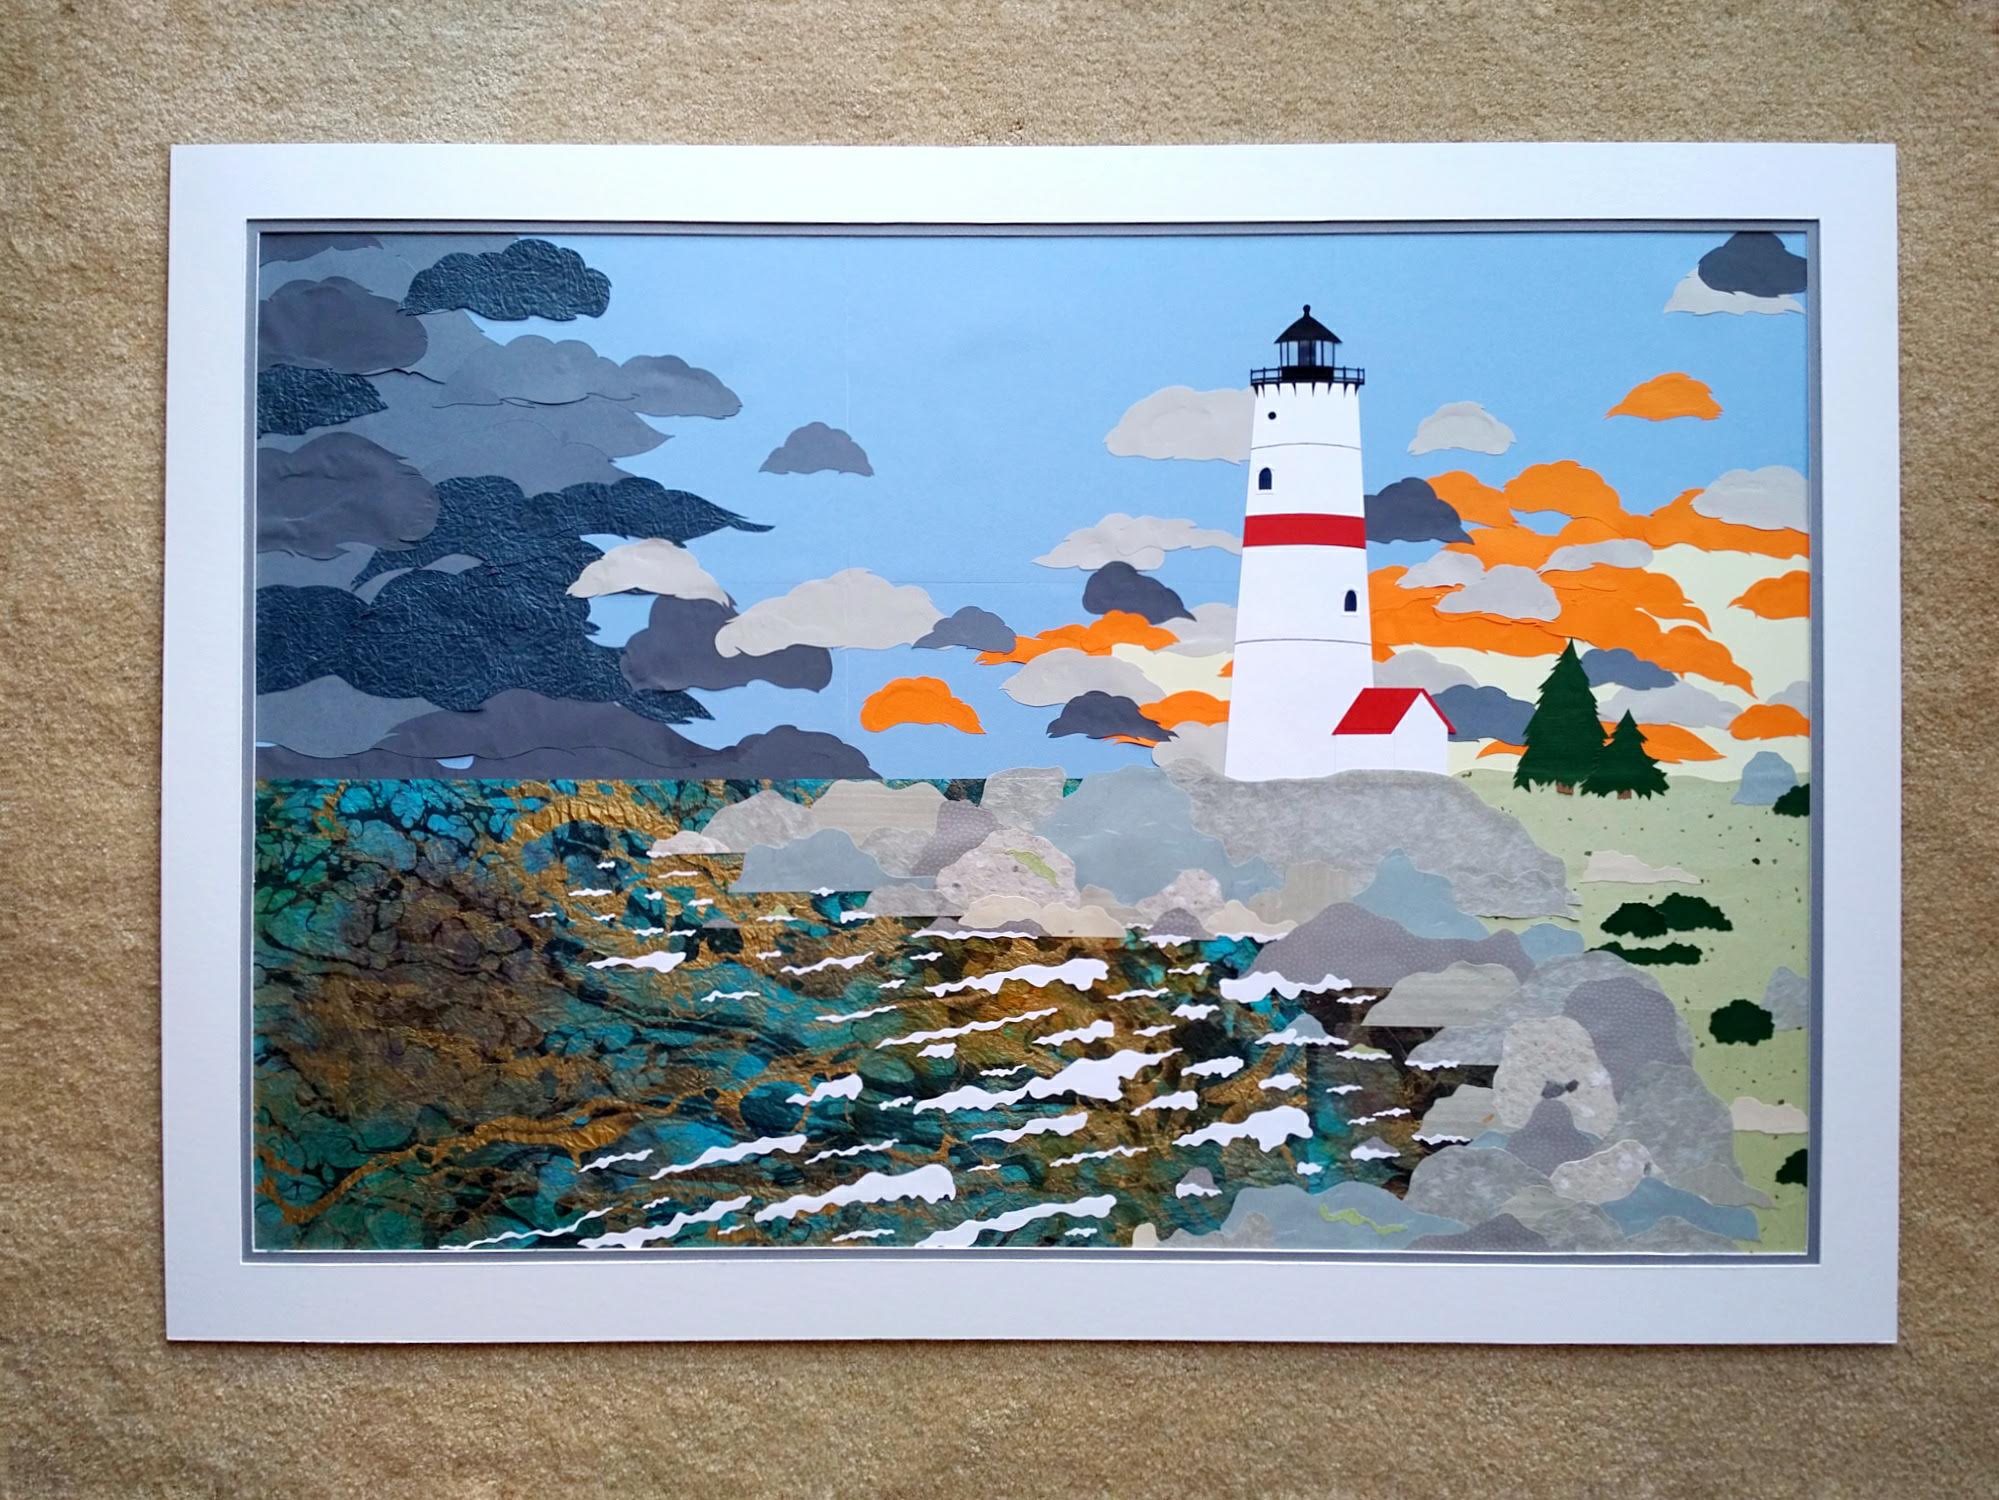 Image of a white lighthouse with a red stripe on top of a rocky outcropping. There are storm clouds and orange clouds from a sunset. The ocean has a marbled surface and whitecaps. The entire piece is made from various texture and color papers. 